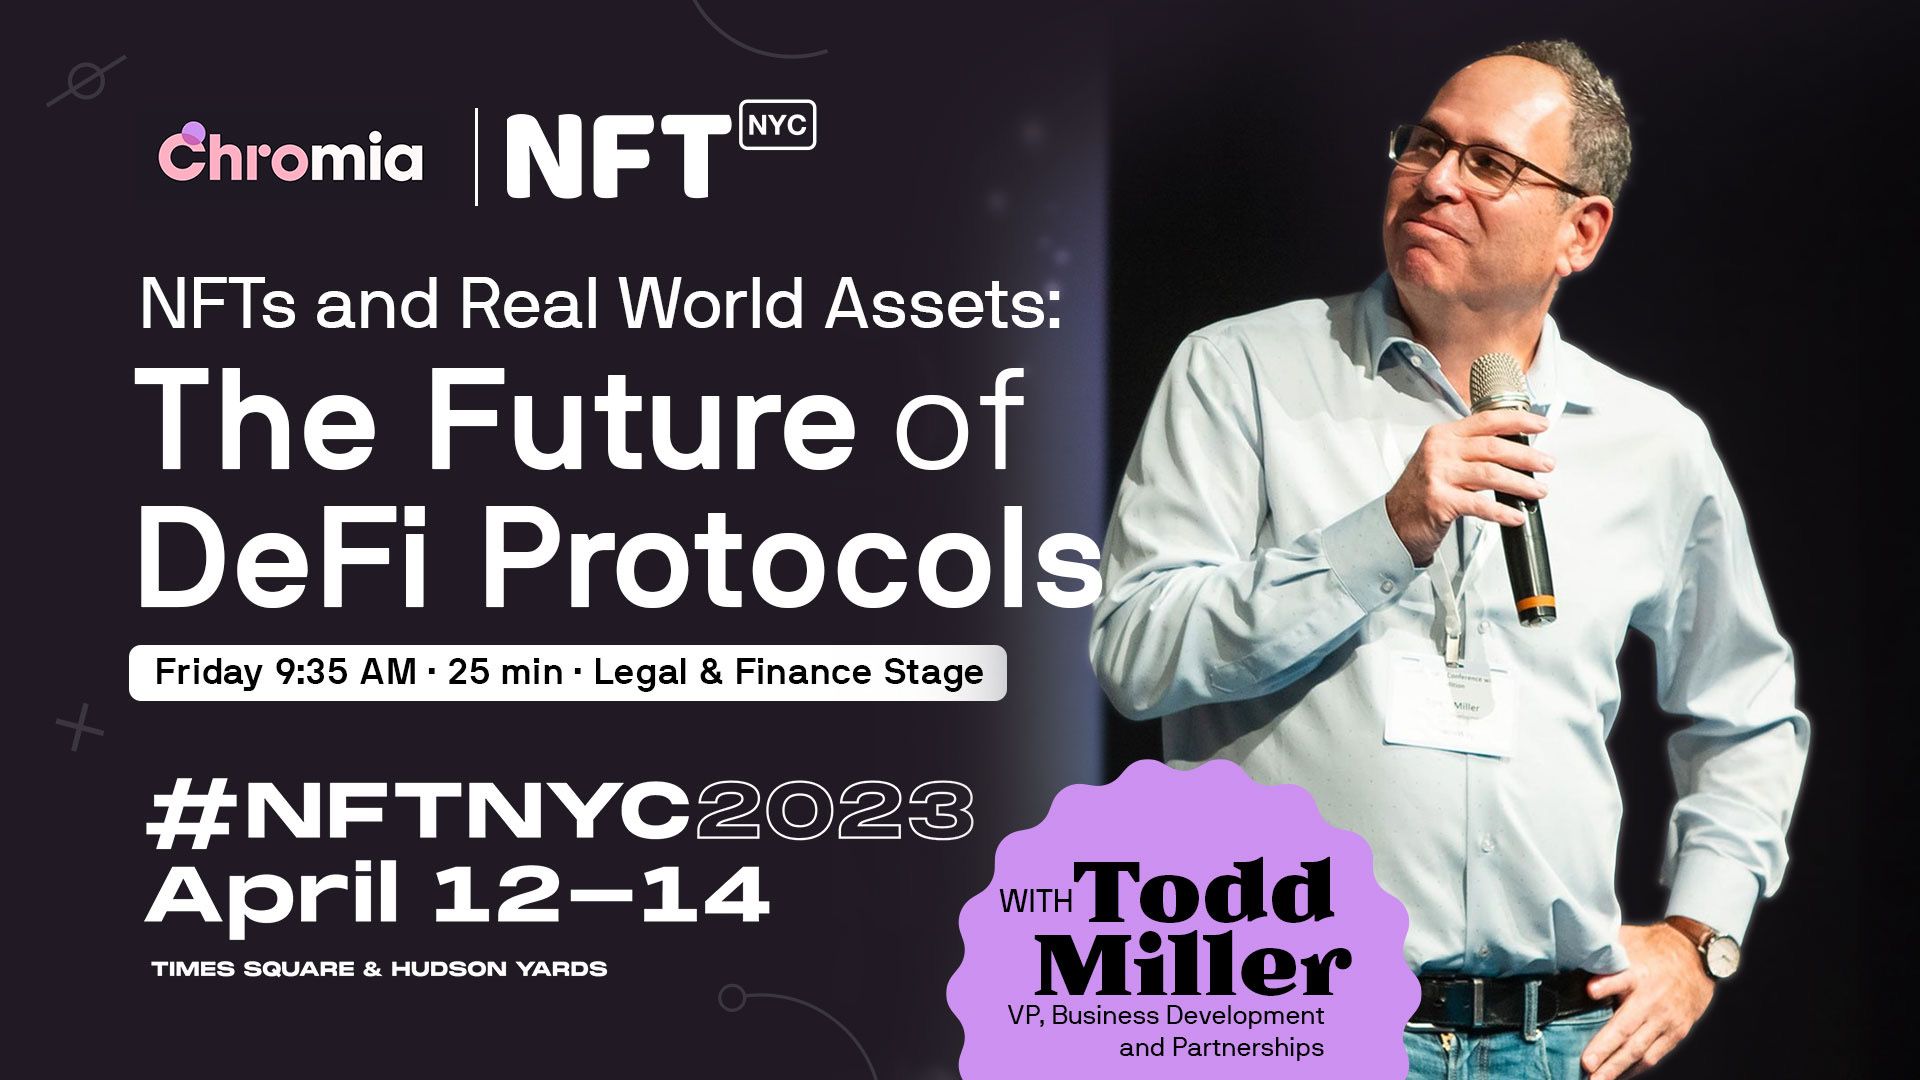 Join Todd Miller at NFT.NYC 2023 for “NFTs and Real World Assets: The Future of DeFi Protocols”